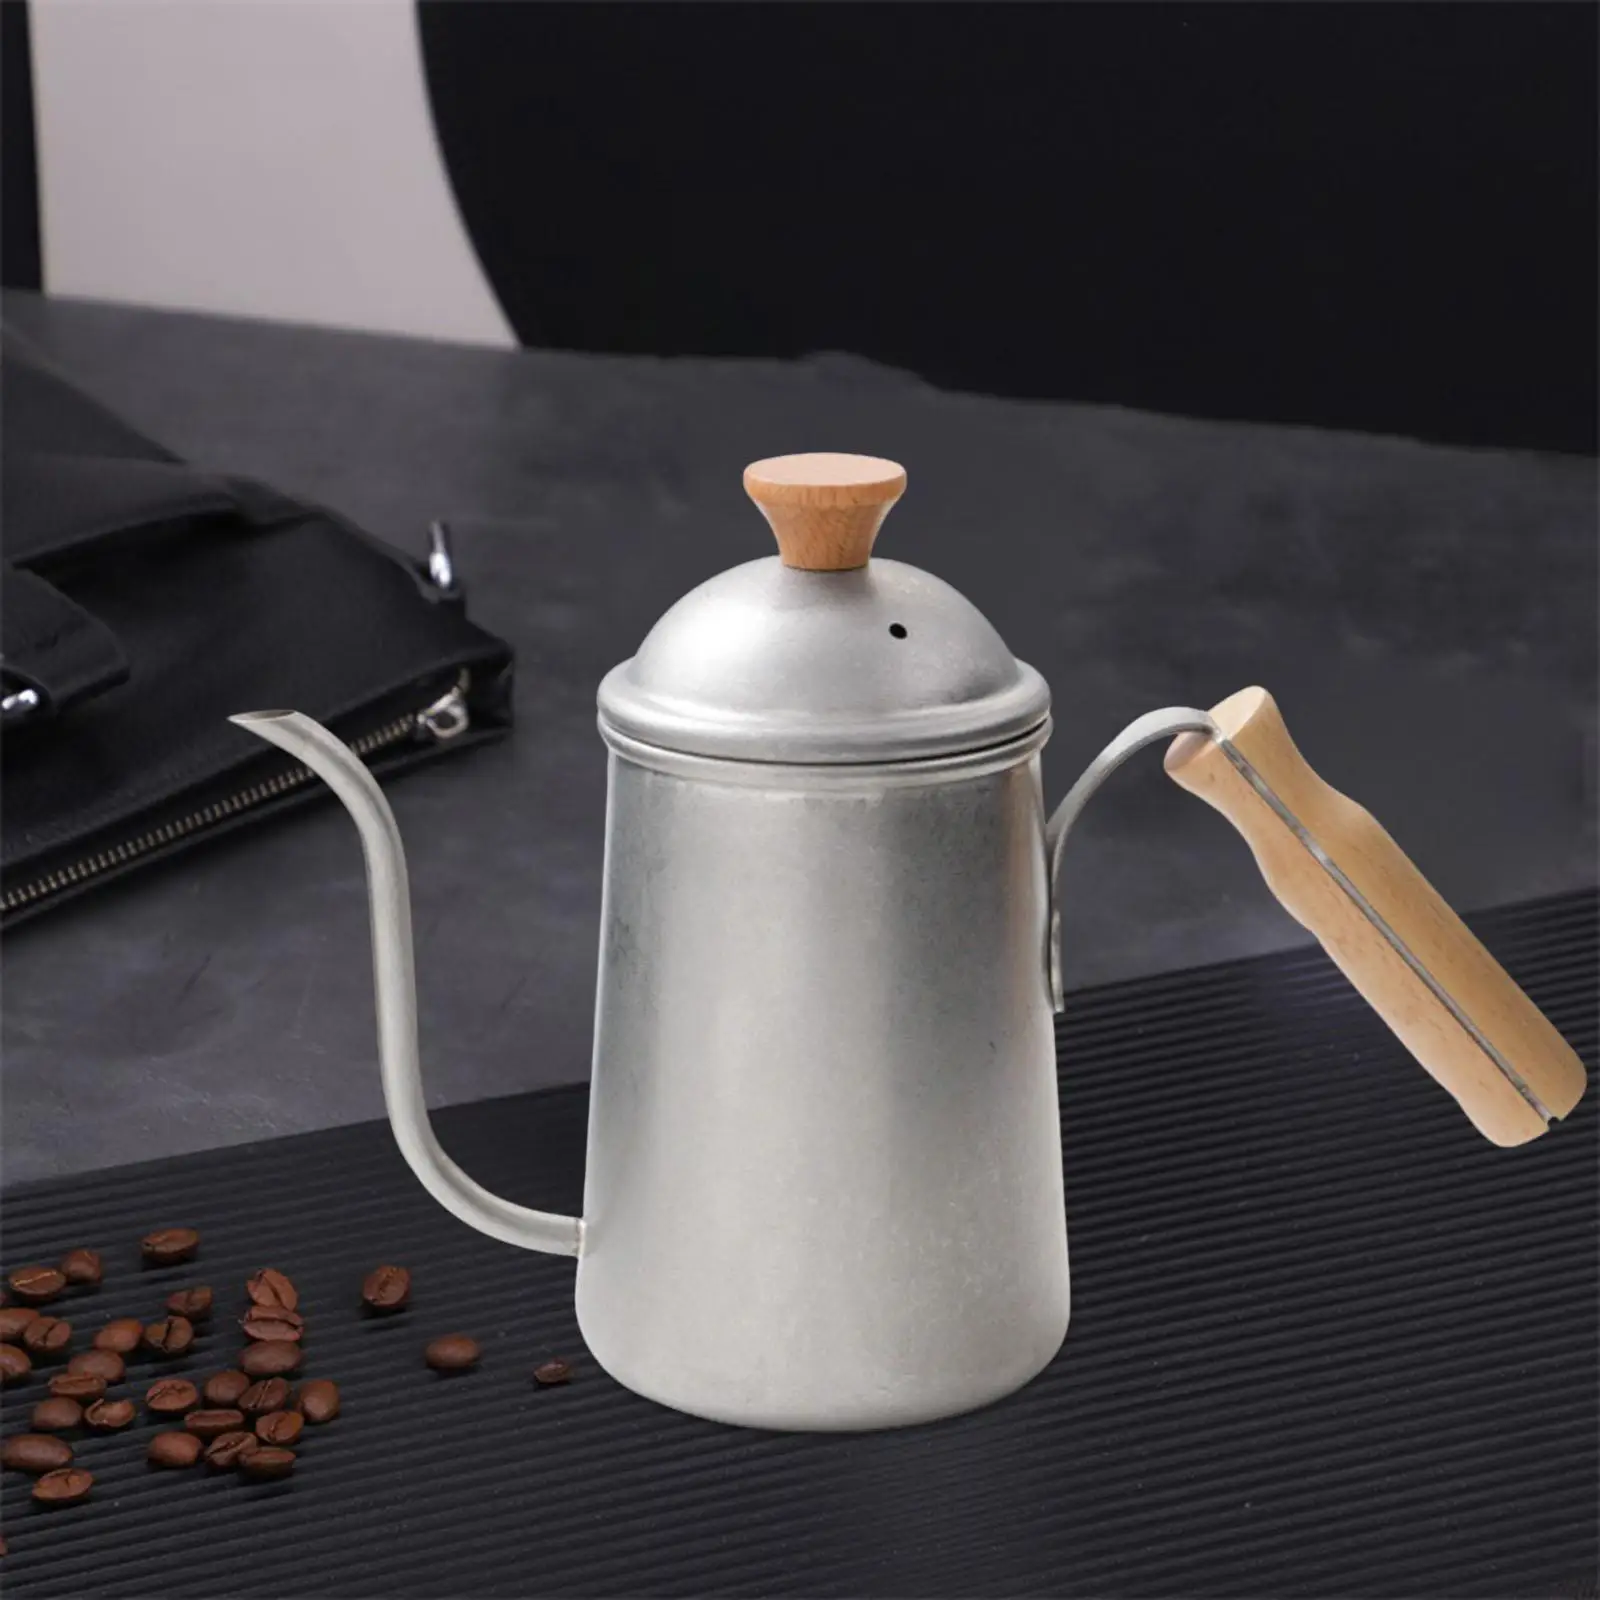 Stainless Steel Pour Over Coffee Kettle Coffee Maker Kettle Long Narrow Neck Tea Pot Coffee Drip Pot for Kitchen Home Cafe